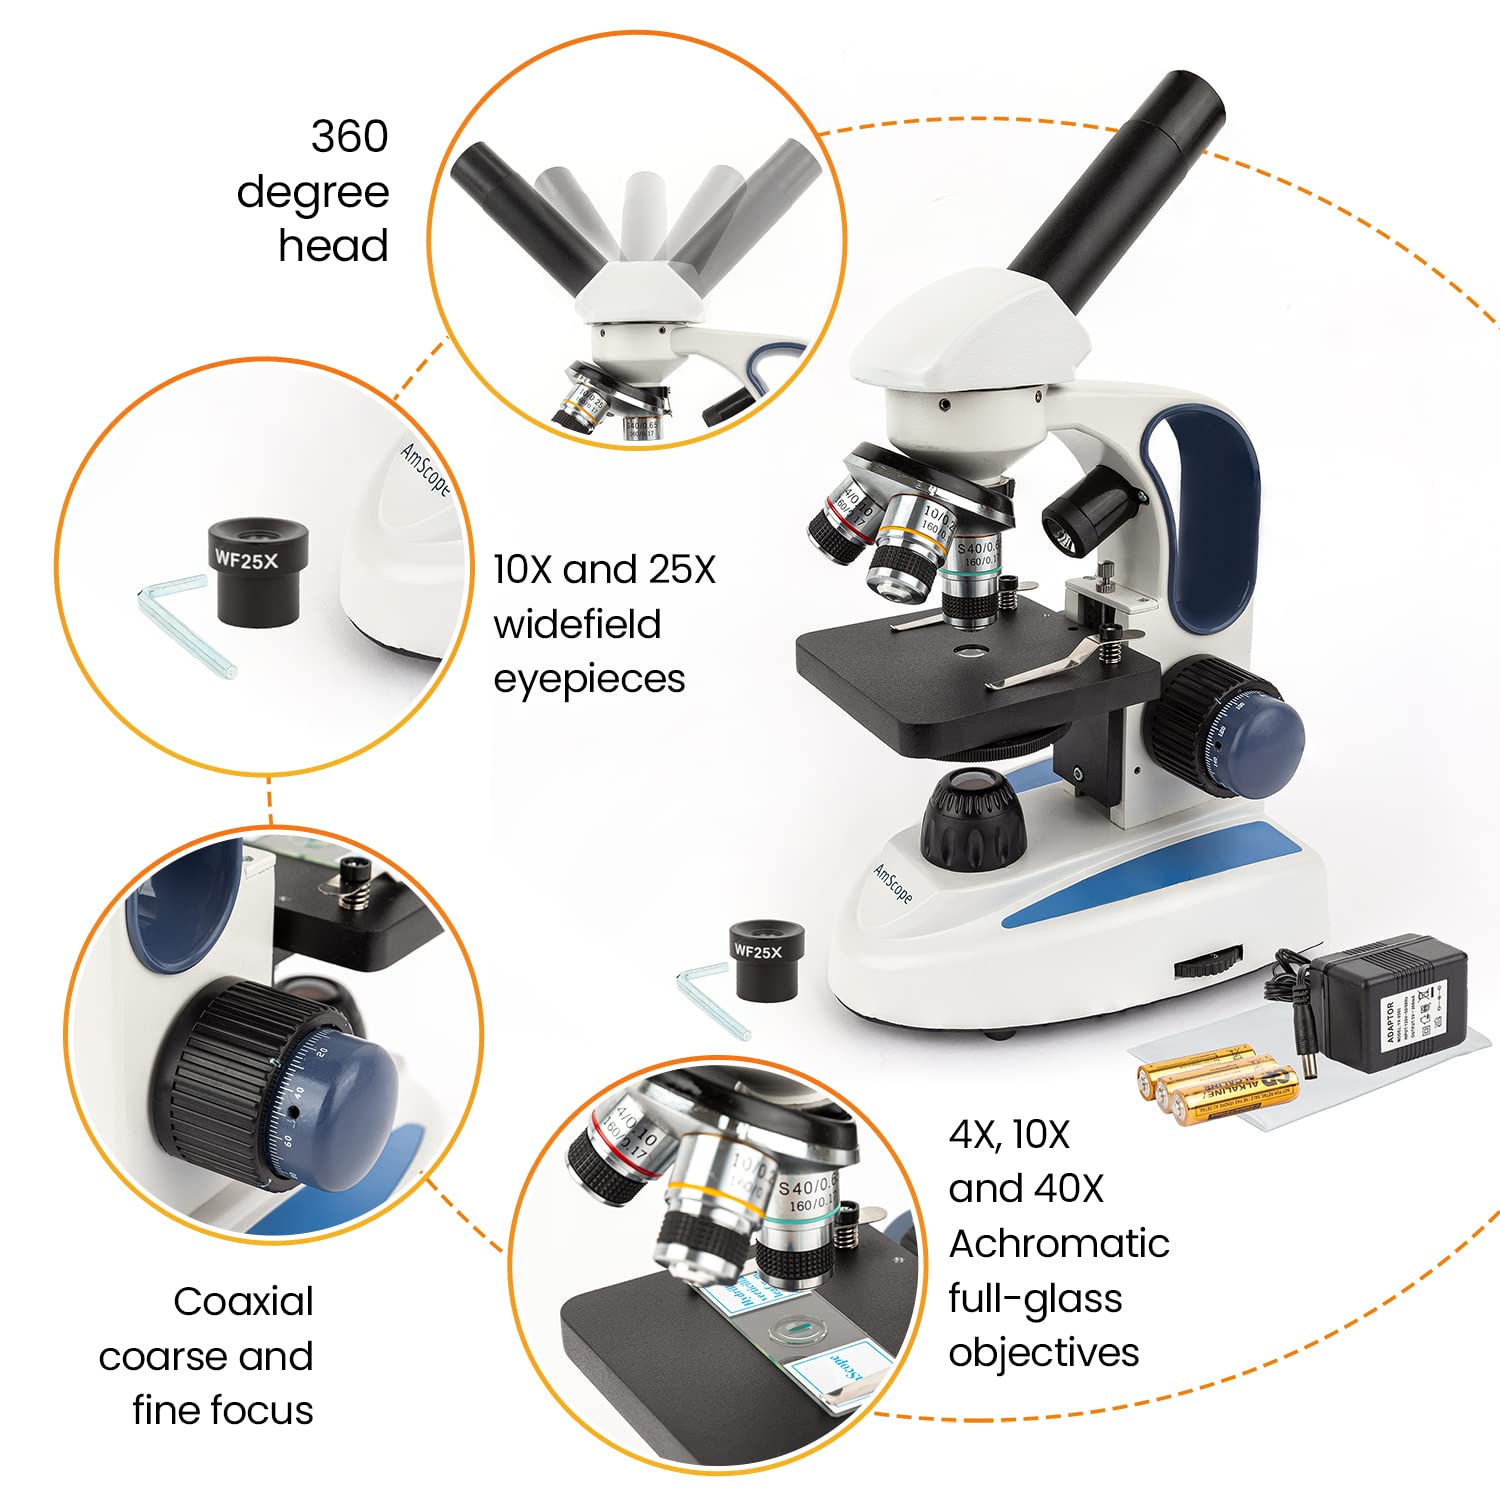 AmScope M158C-E Compound Monocular Microscope, WF10x and WF25x Eyepieces, 40x-1000x Magnification, Brightfield, LED Illumination, Plain Stage, 110V, Includes 0.3MP Camera and Software